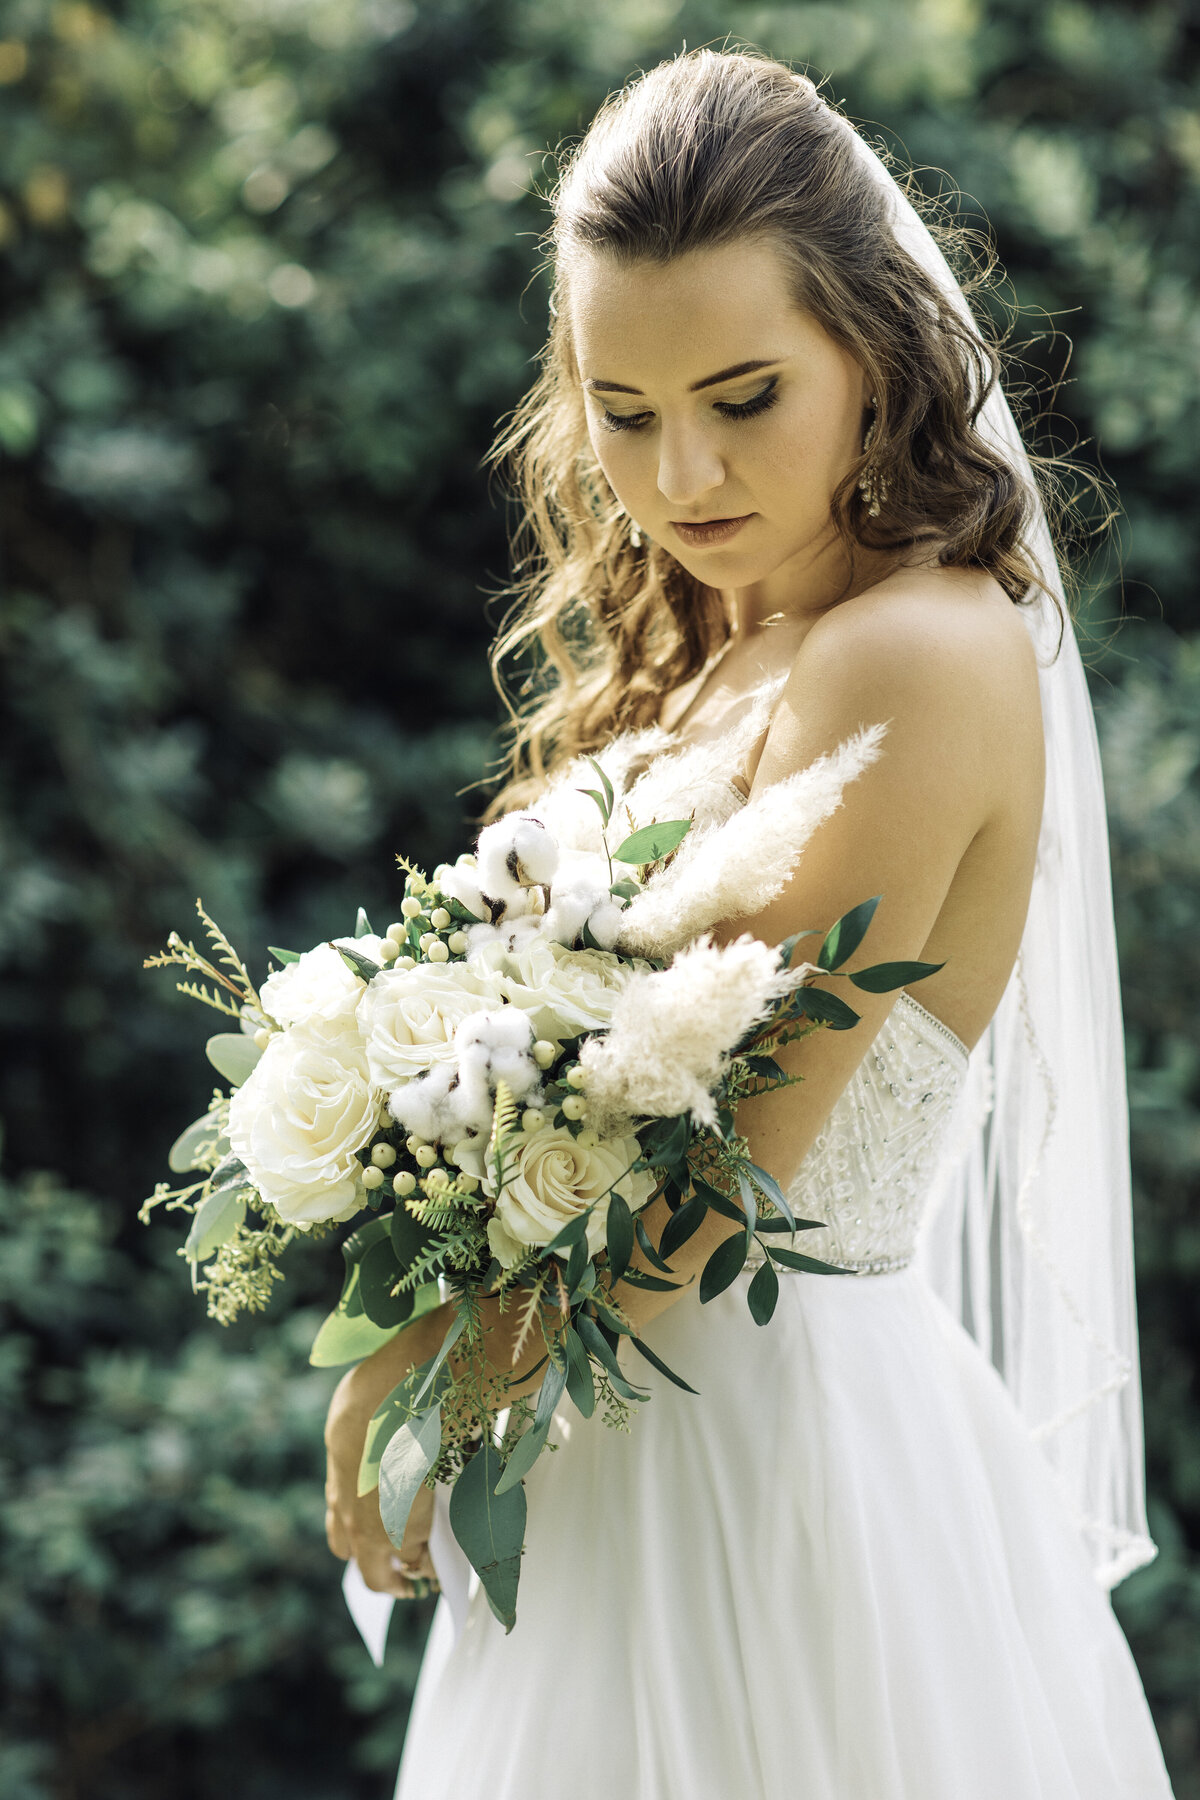 Wedding Photograph Of Bride Holding a Bouquet of Flowers Los Angeles